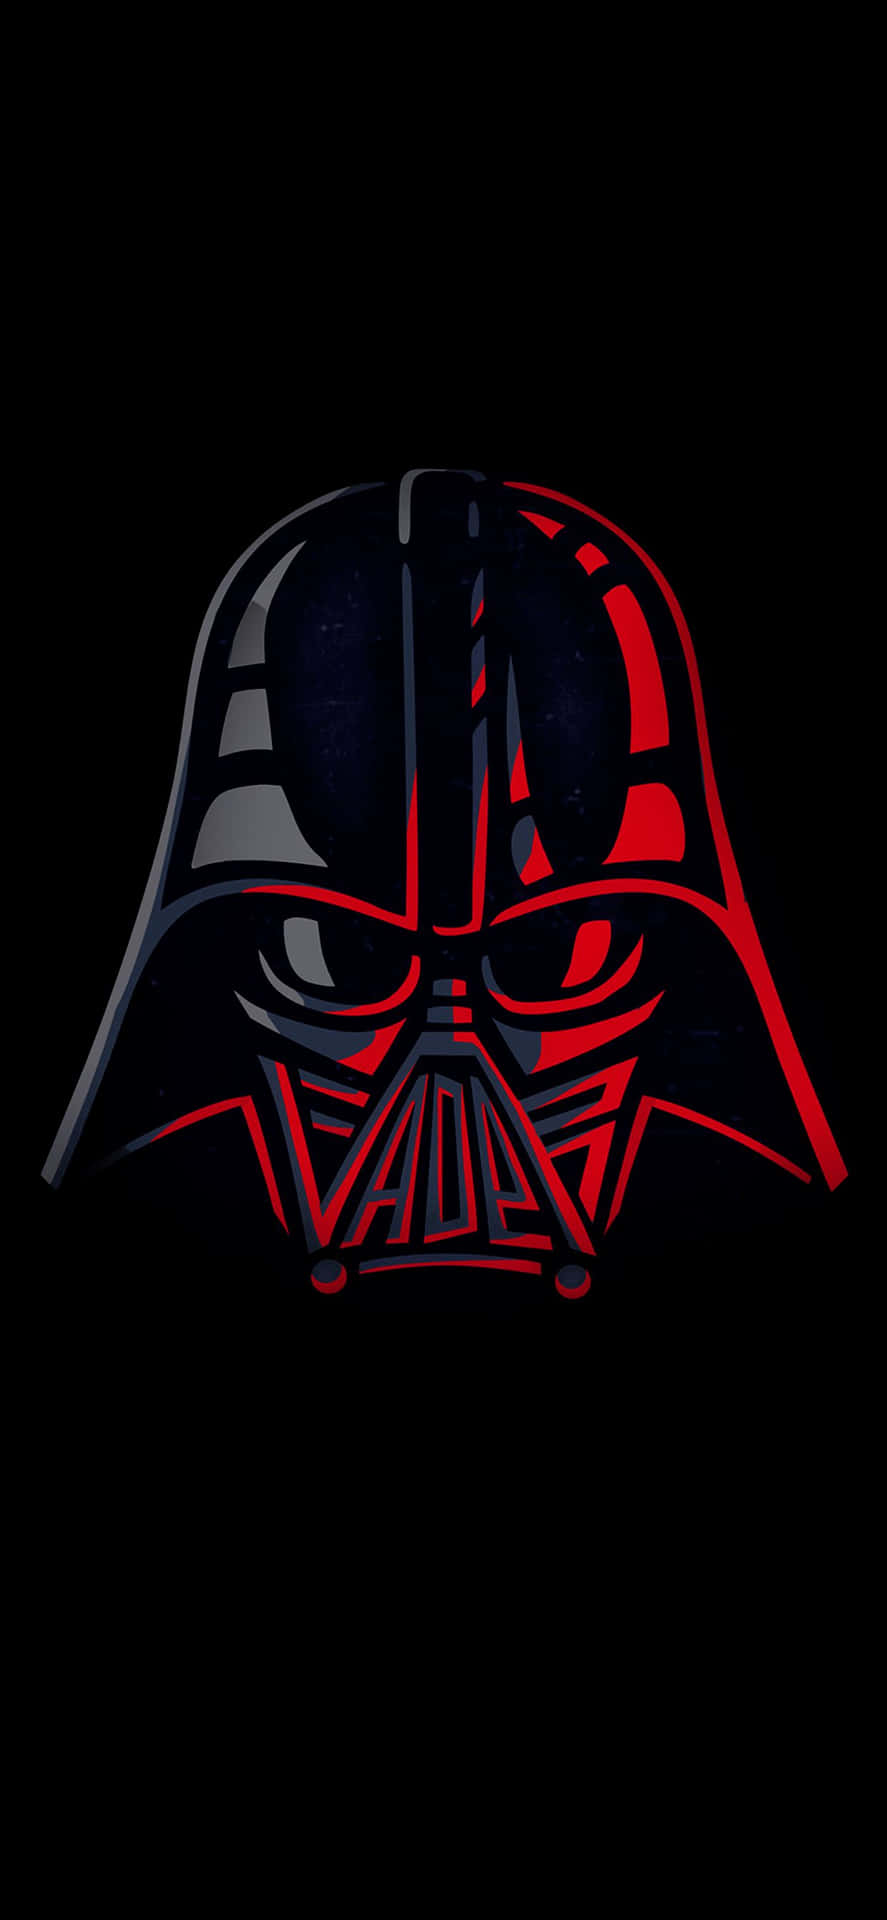 Check out the new Star Wars Phone with all your favorite characters from the classic movie. Wallpaper